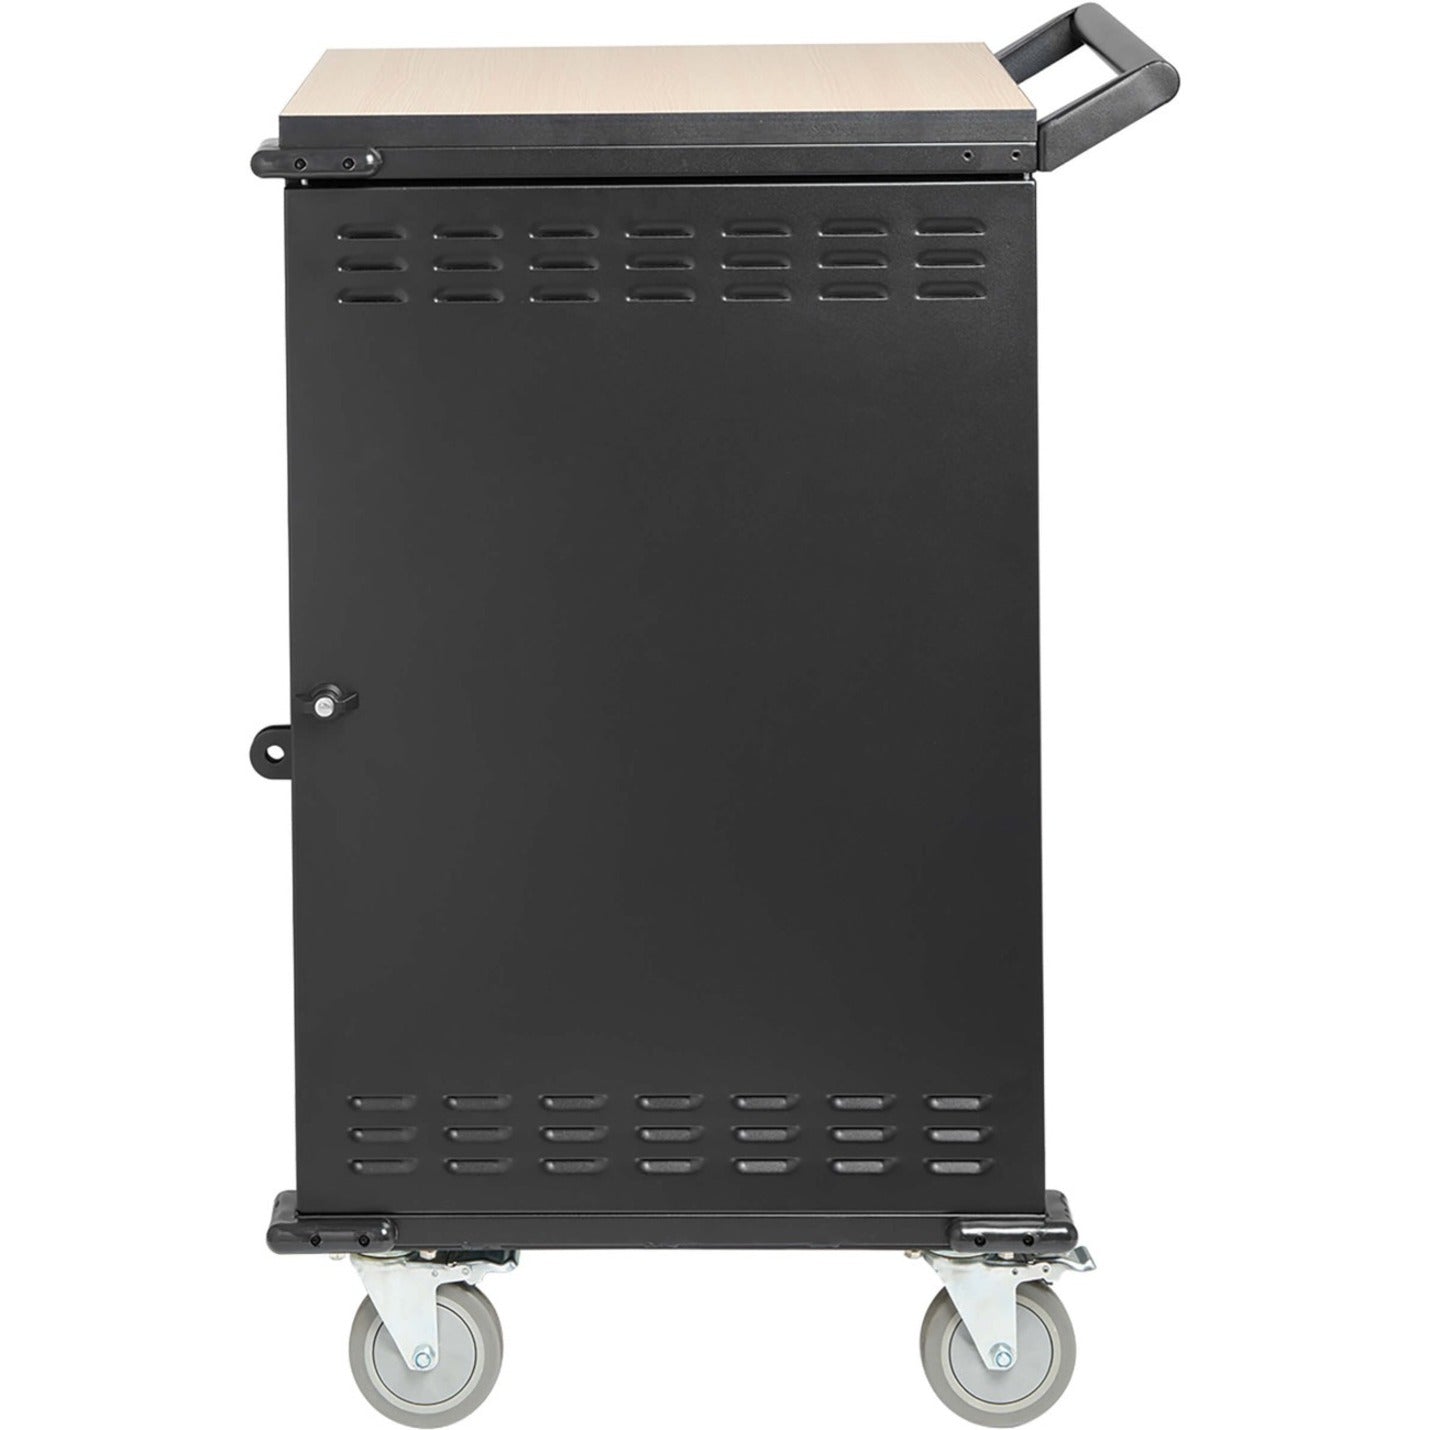 Tripp Lite CSCSTORAGE1 Locking Storage Cart for Mobile Devices and AV Equipment - Black, Anti-theft, Mobility, Key Lock